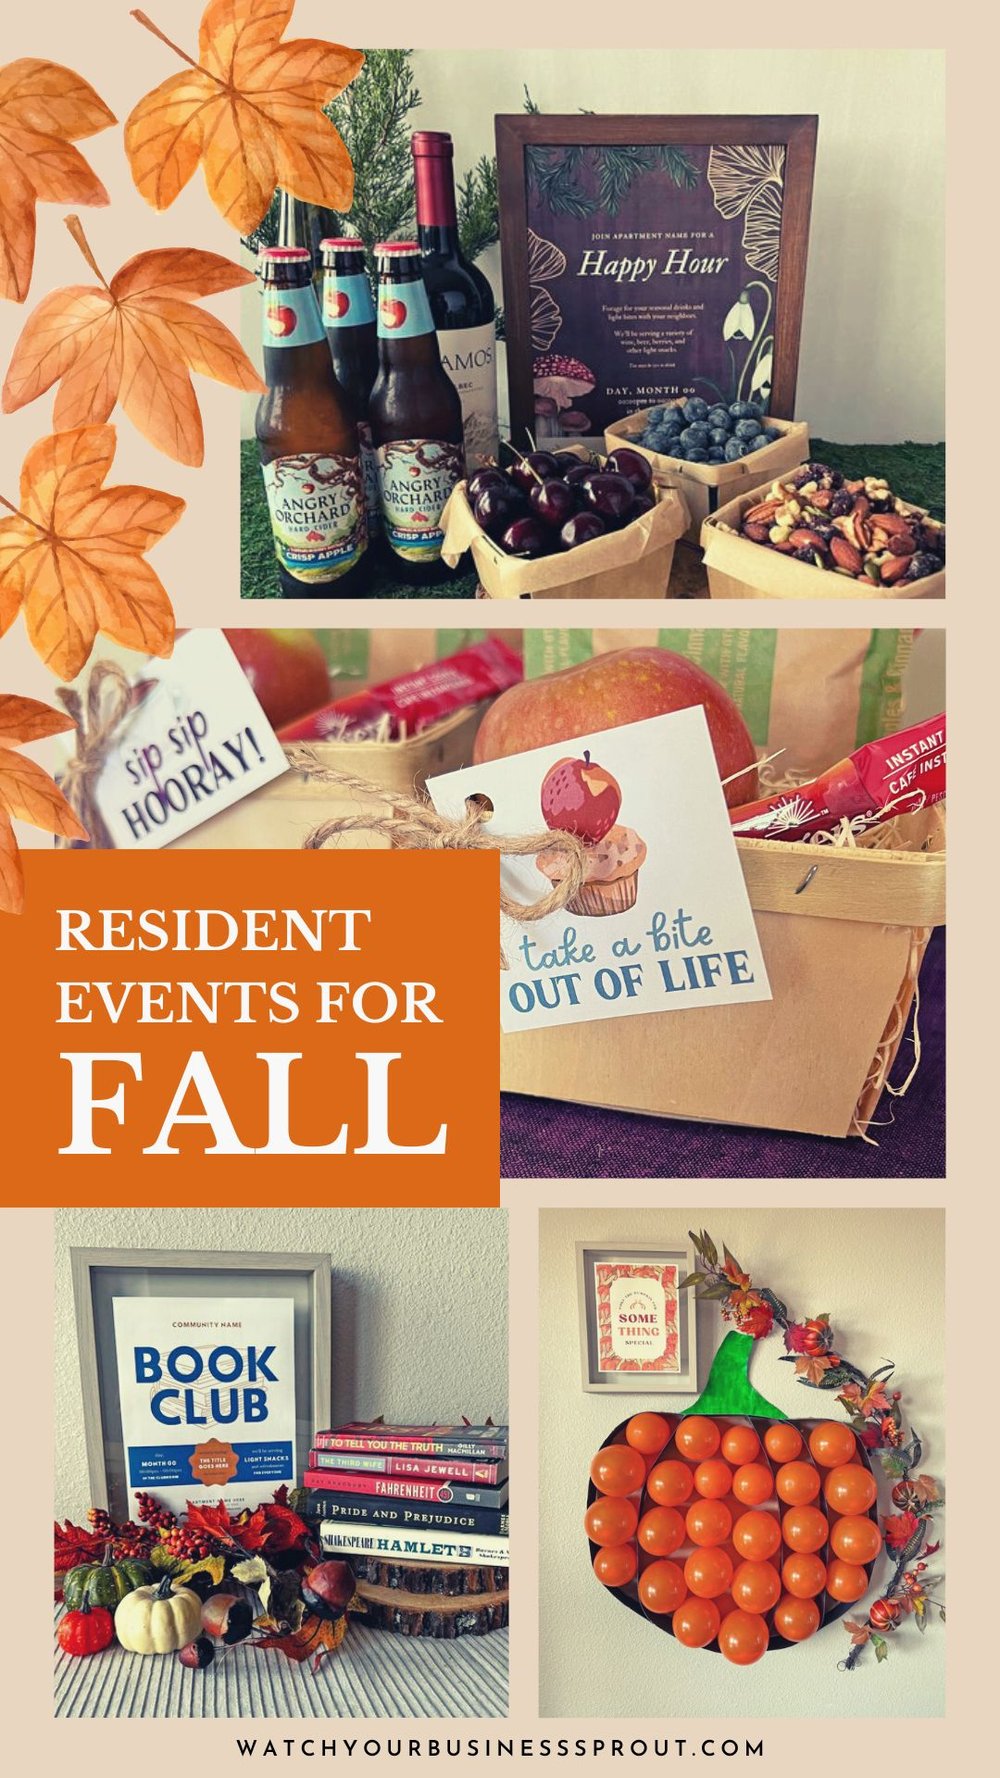 Apartment Marketing Ideas: New Resident Welcome Gifts for Moving into Your  Apartment Community — Sprout Marketing